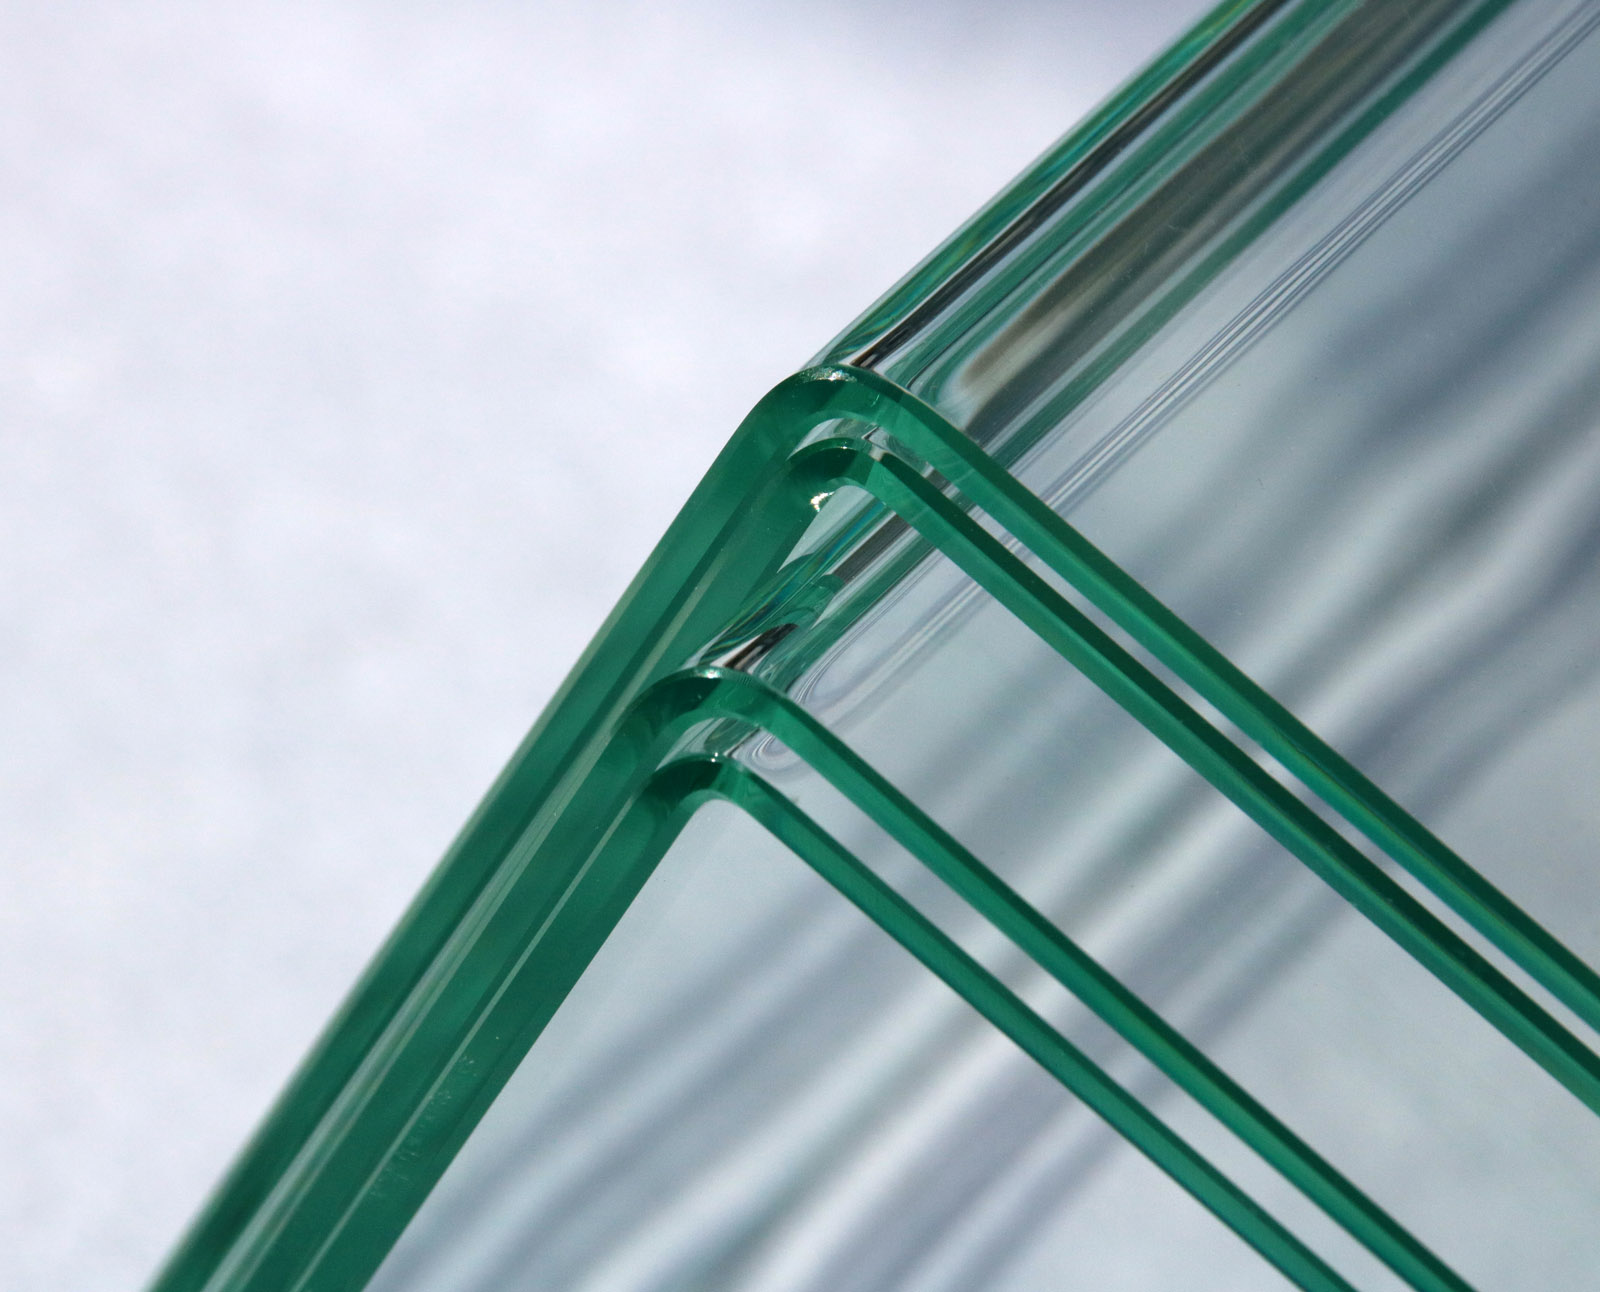 Using the new laser-based glass-bending process, it is possible to achieve precisely defined and extremely small bend radii, so that even laminated safety glass can be bent around a corner. The sheets of glass in the image are three millimeters thick.